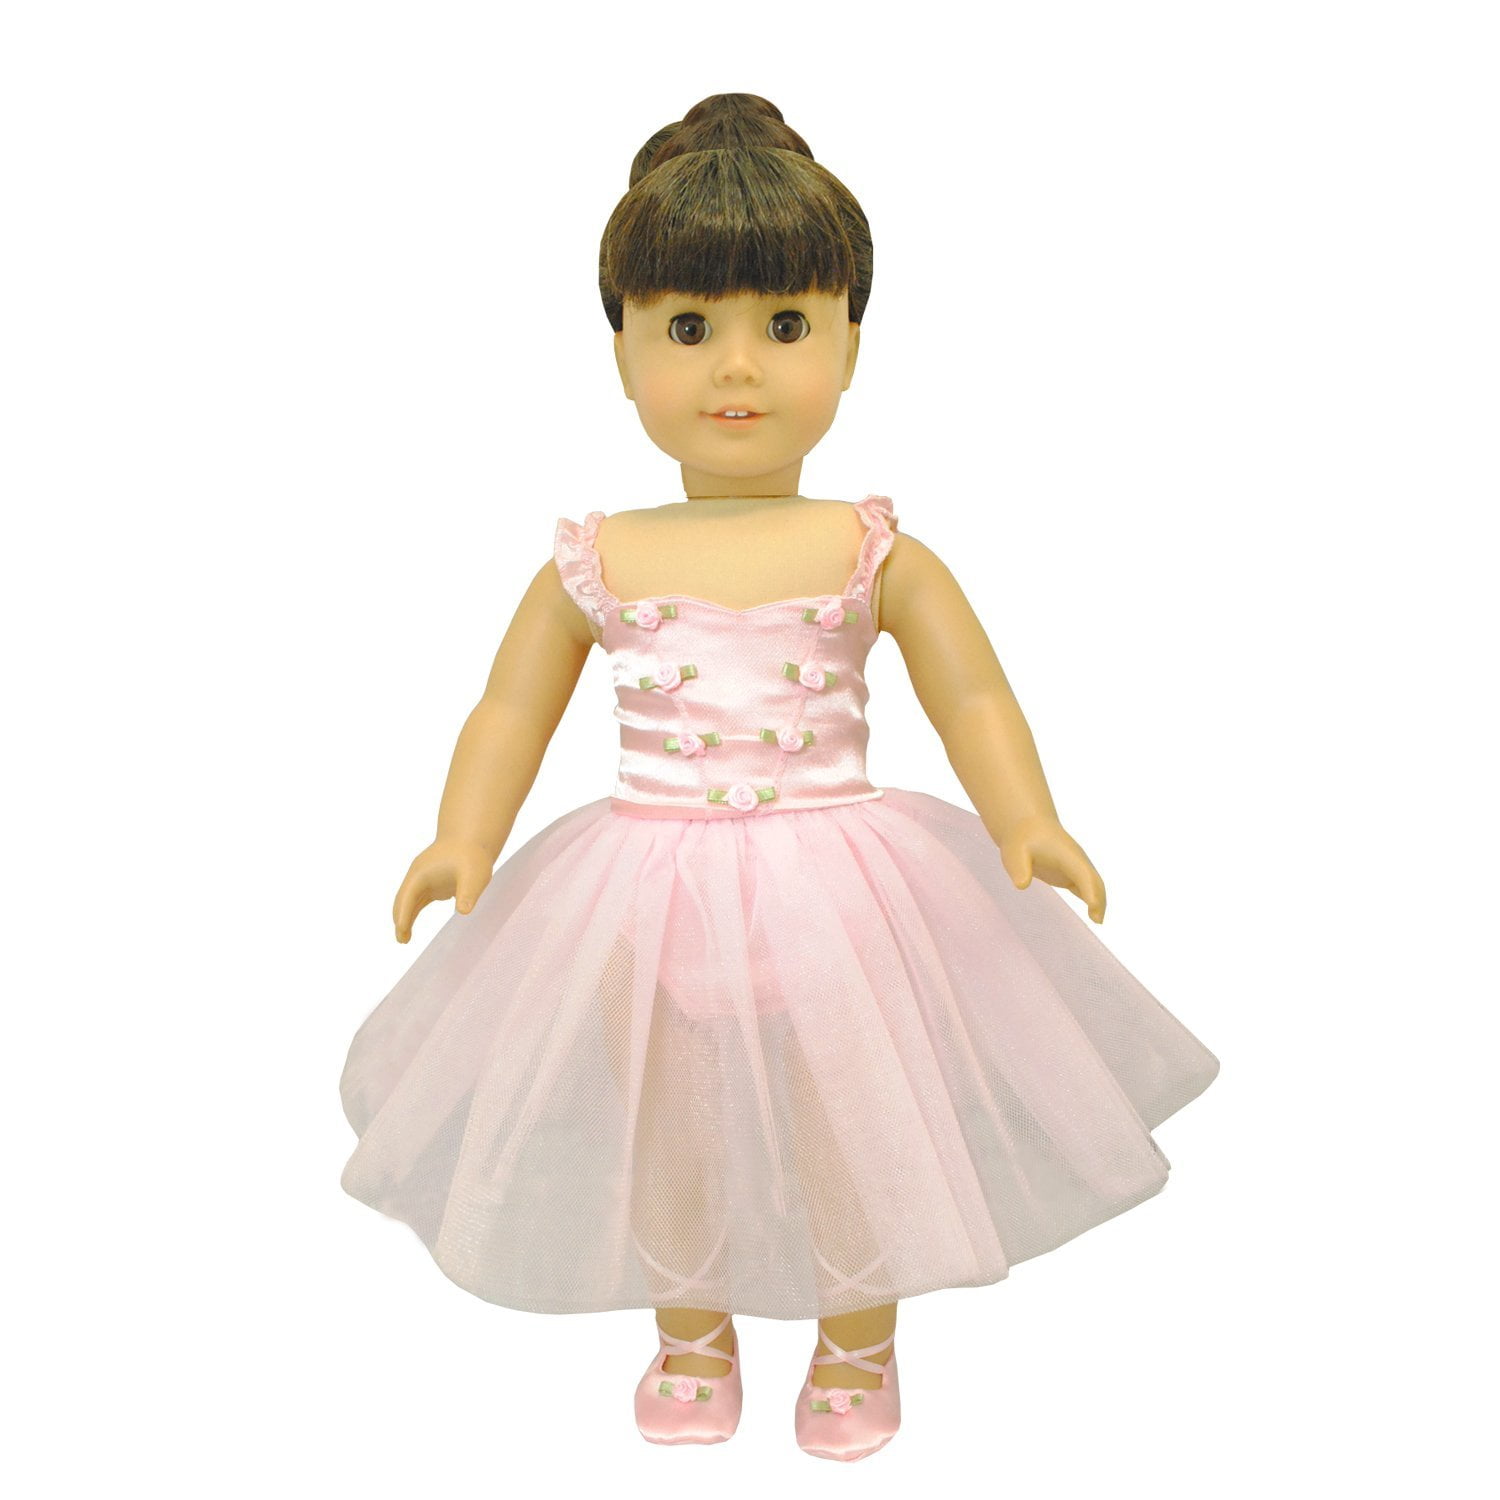 Pink Doll Clothes Ballet Dress Fit For 18 Inch American Girl Dolls Handmade #2